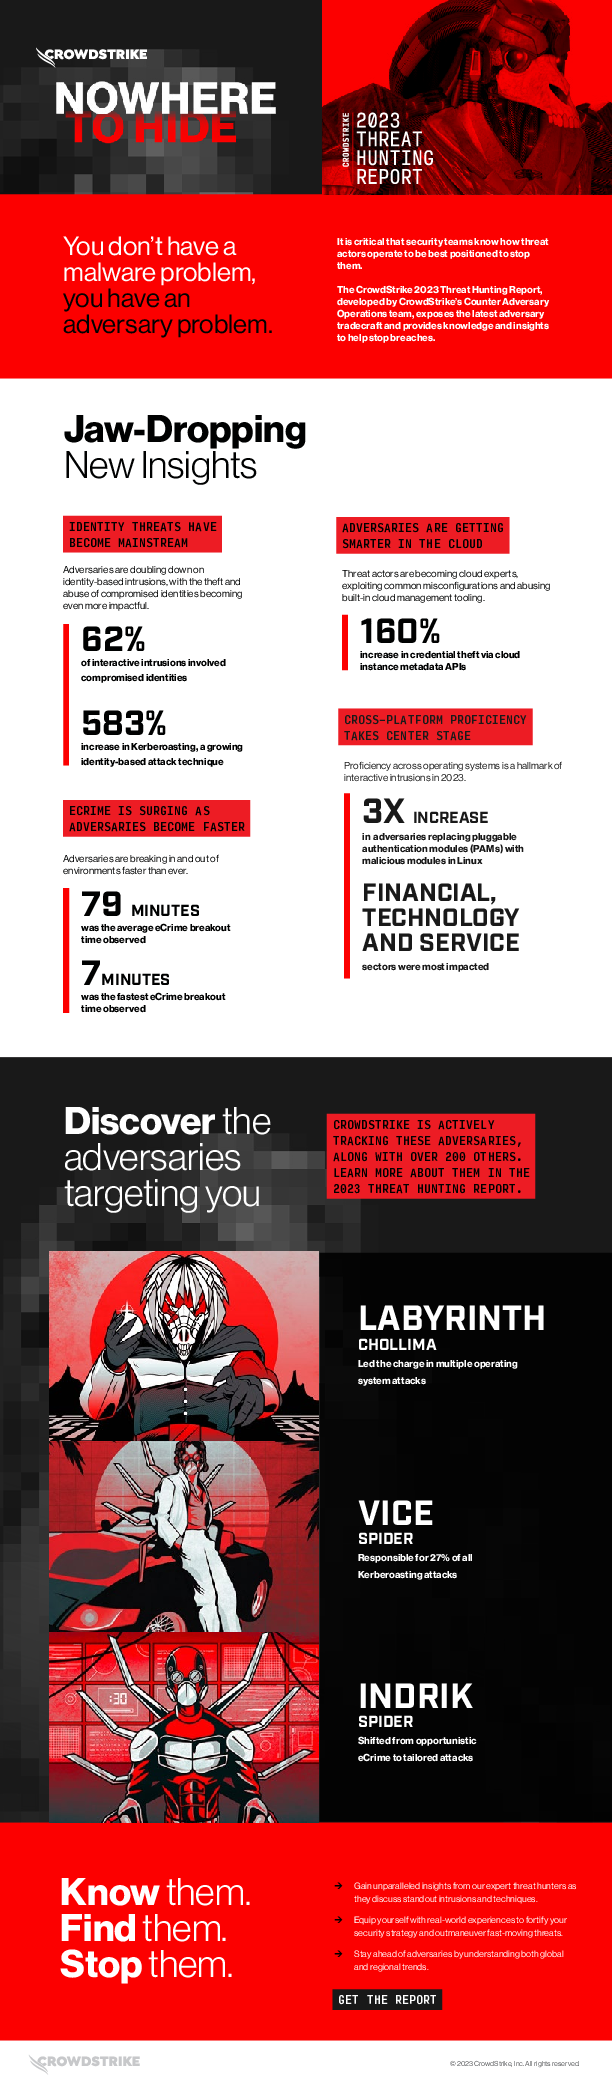 Nowhere to Hide - Threat Hunting Report Infographic